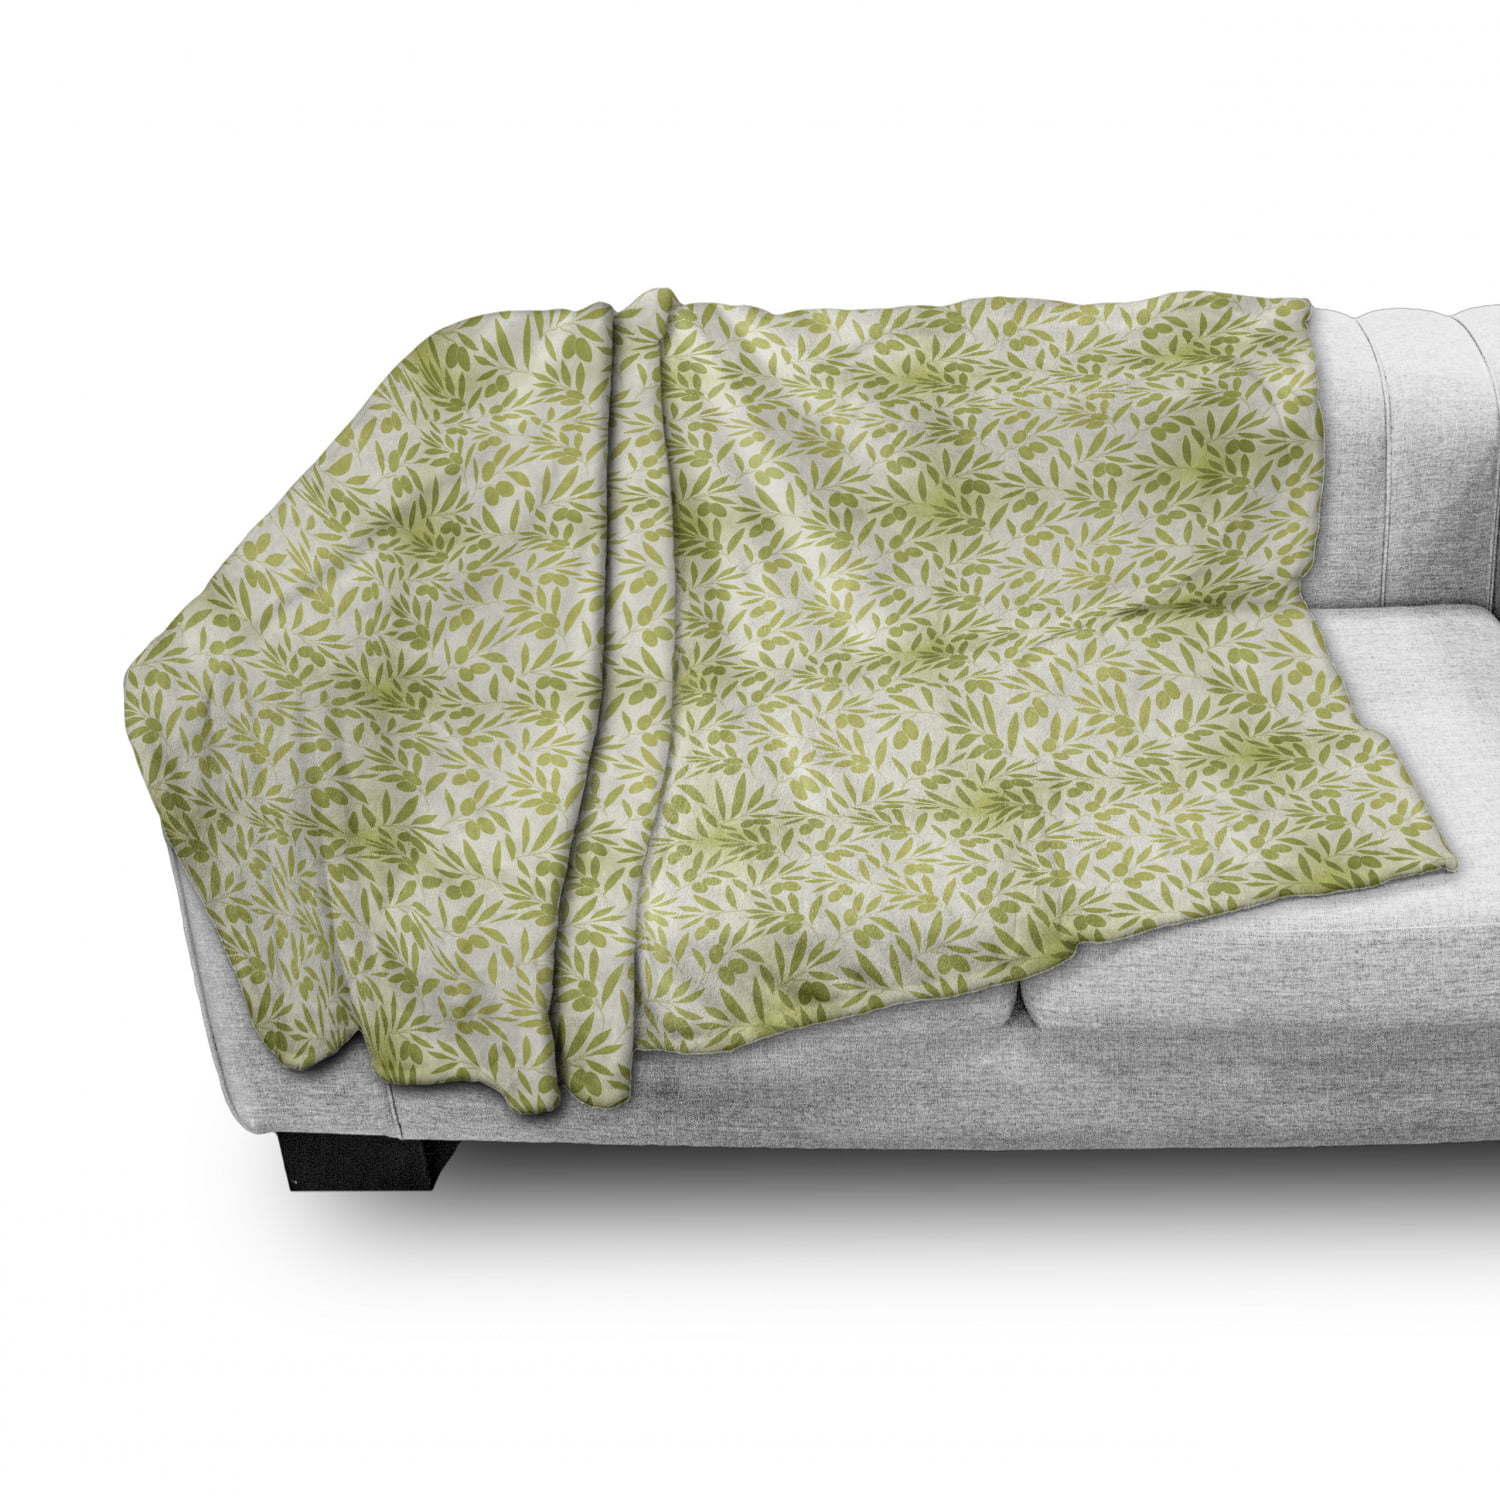 Flannel Fleece Accent Piece Soft Couch Cover for Adults Ambesonne Botanical Throw Blanket Repeating Pattern with Silhouettes of Olive on Leafy Branches 70 x 90 Avocado Green Ivory